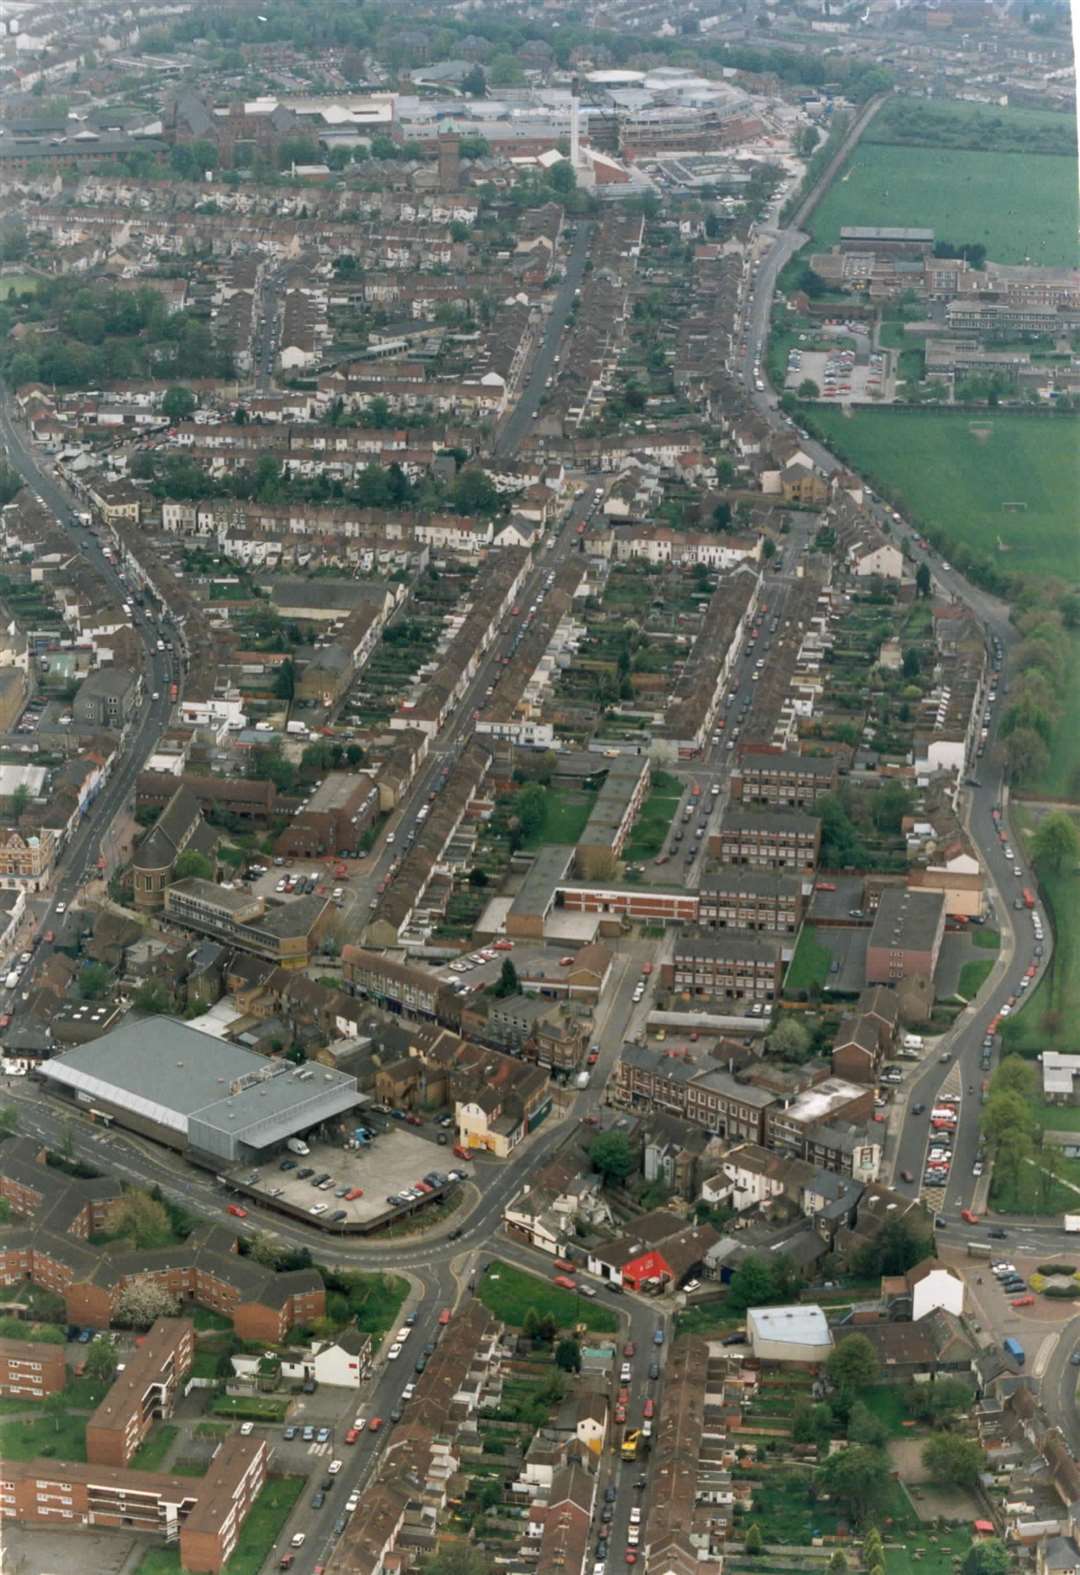 Gillingham town centre in April 1998, with the hospital at the top of the picture